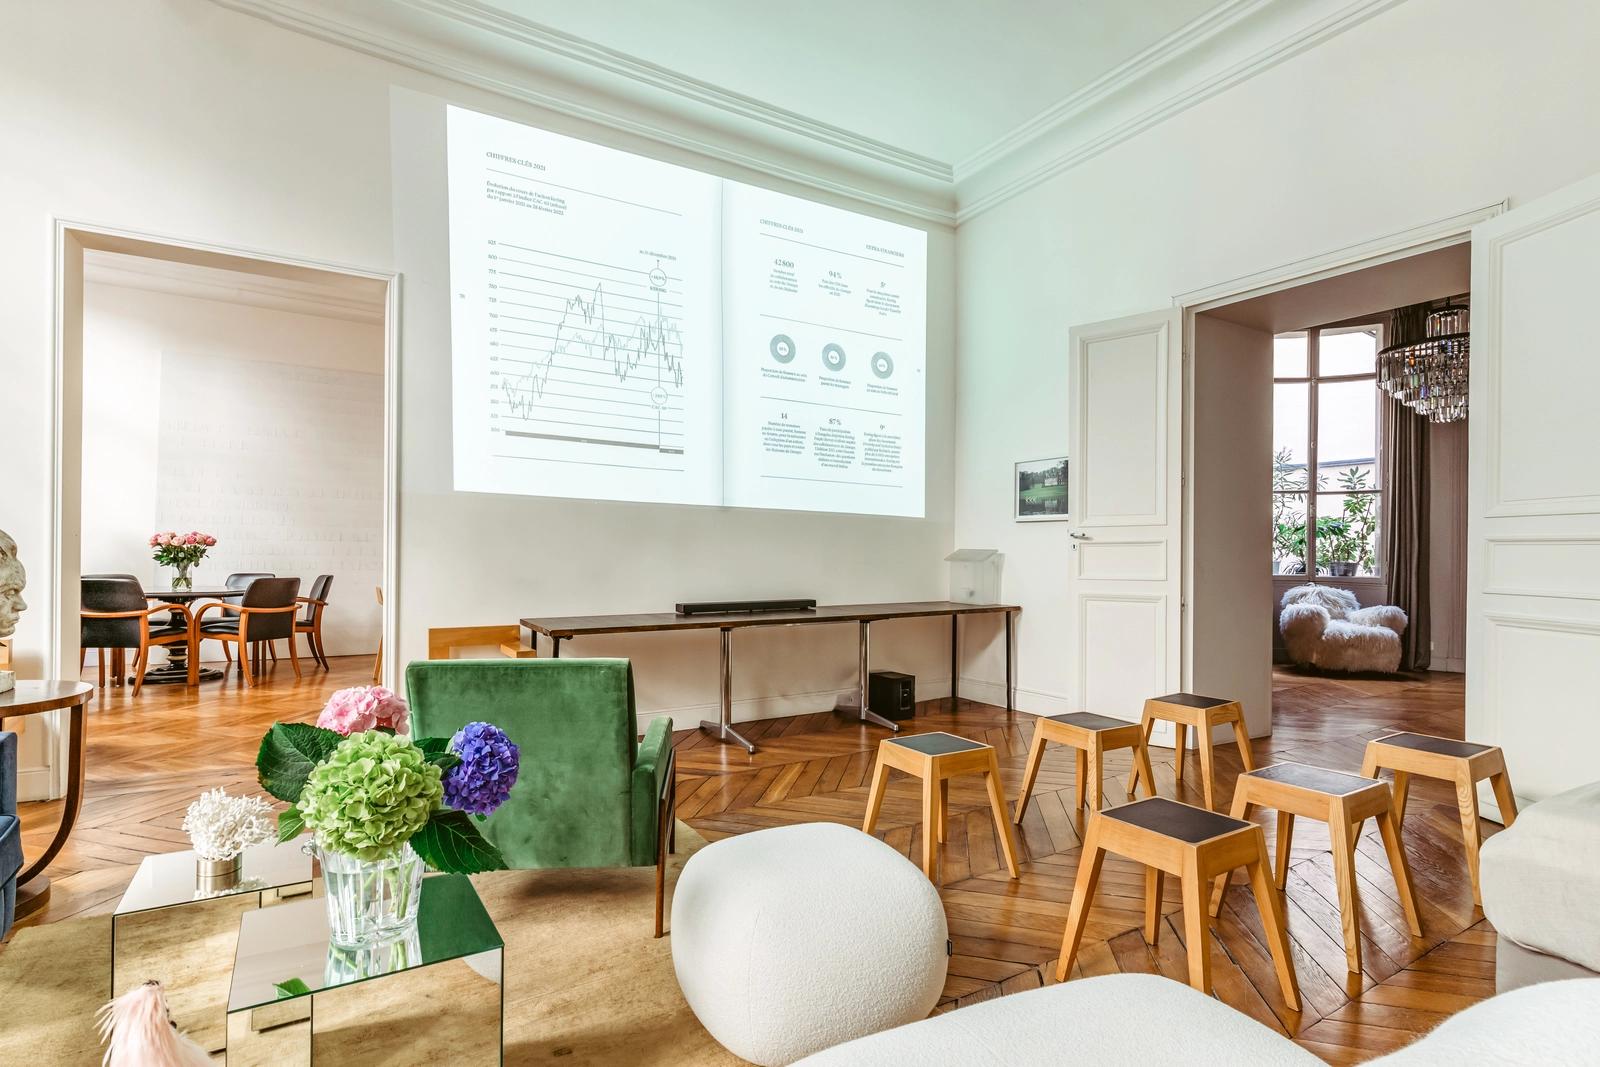 Meeting room in 112m² between La Bourse and the Palais Royal - 2